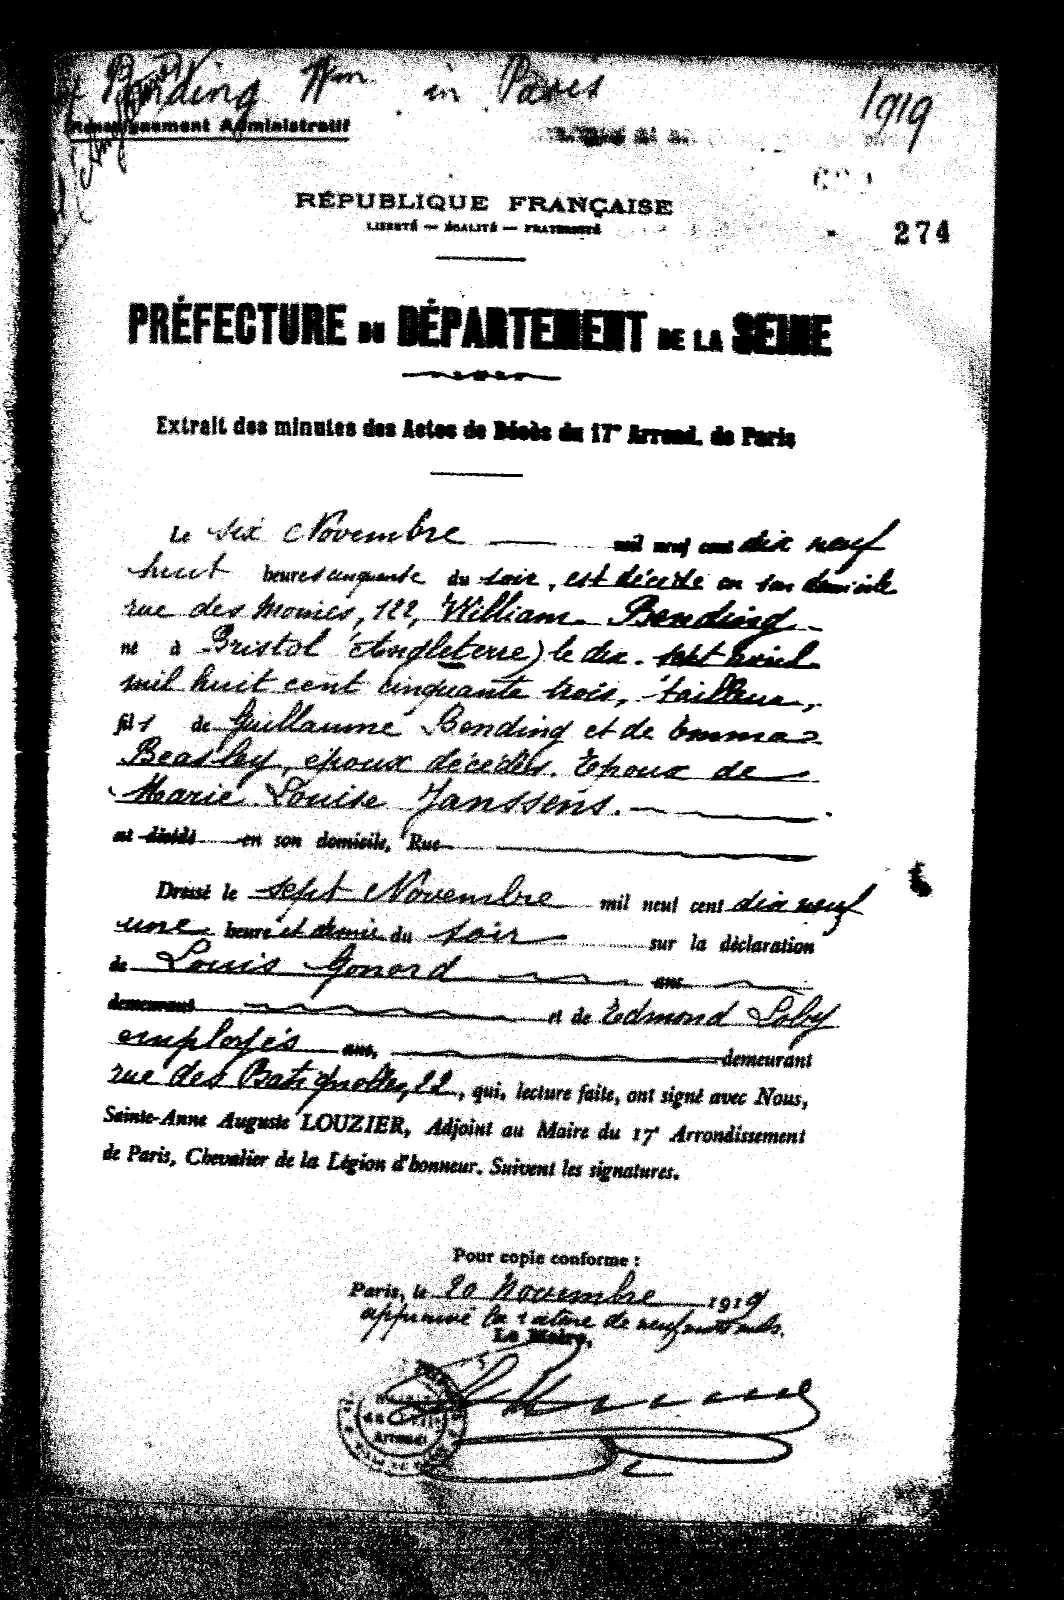 French death certificate - William Bending